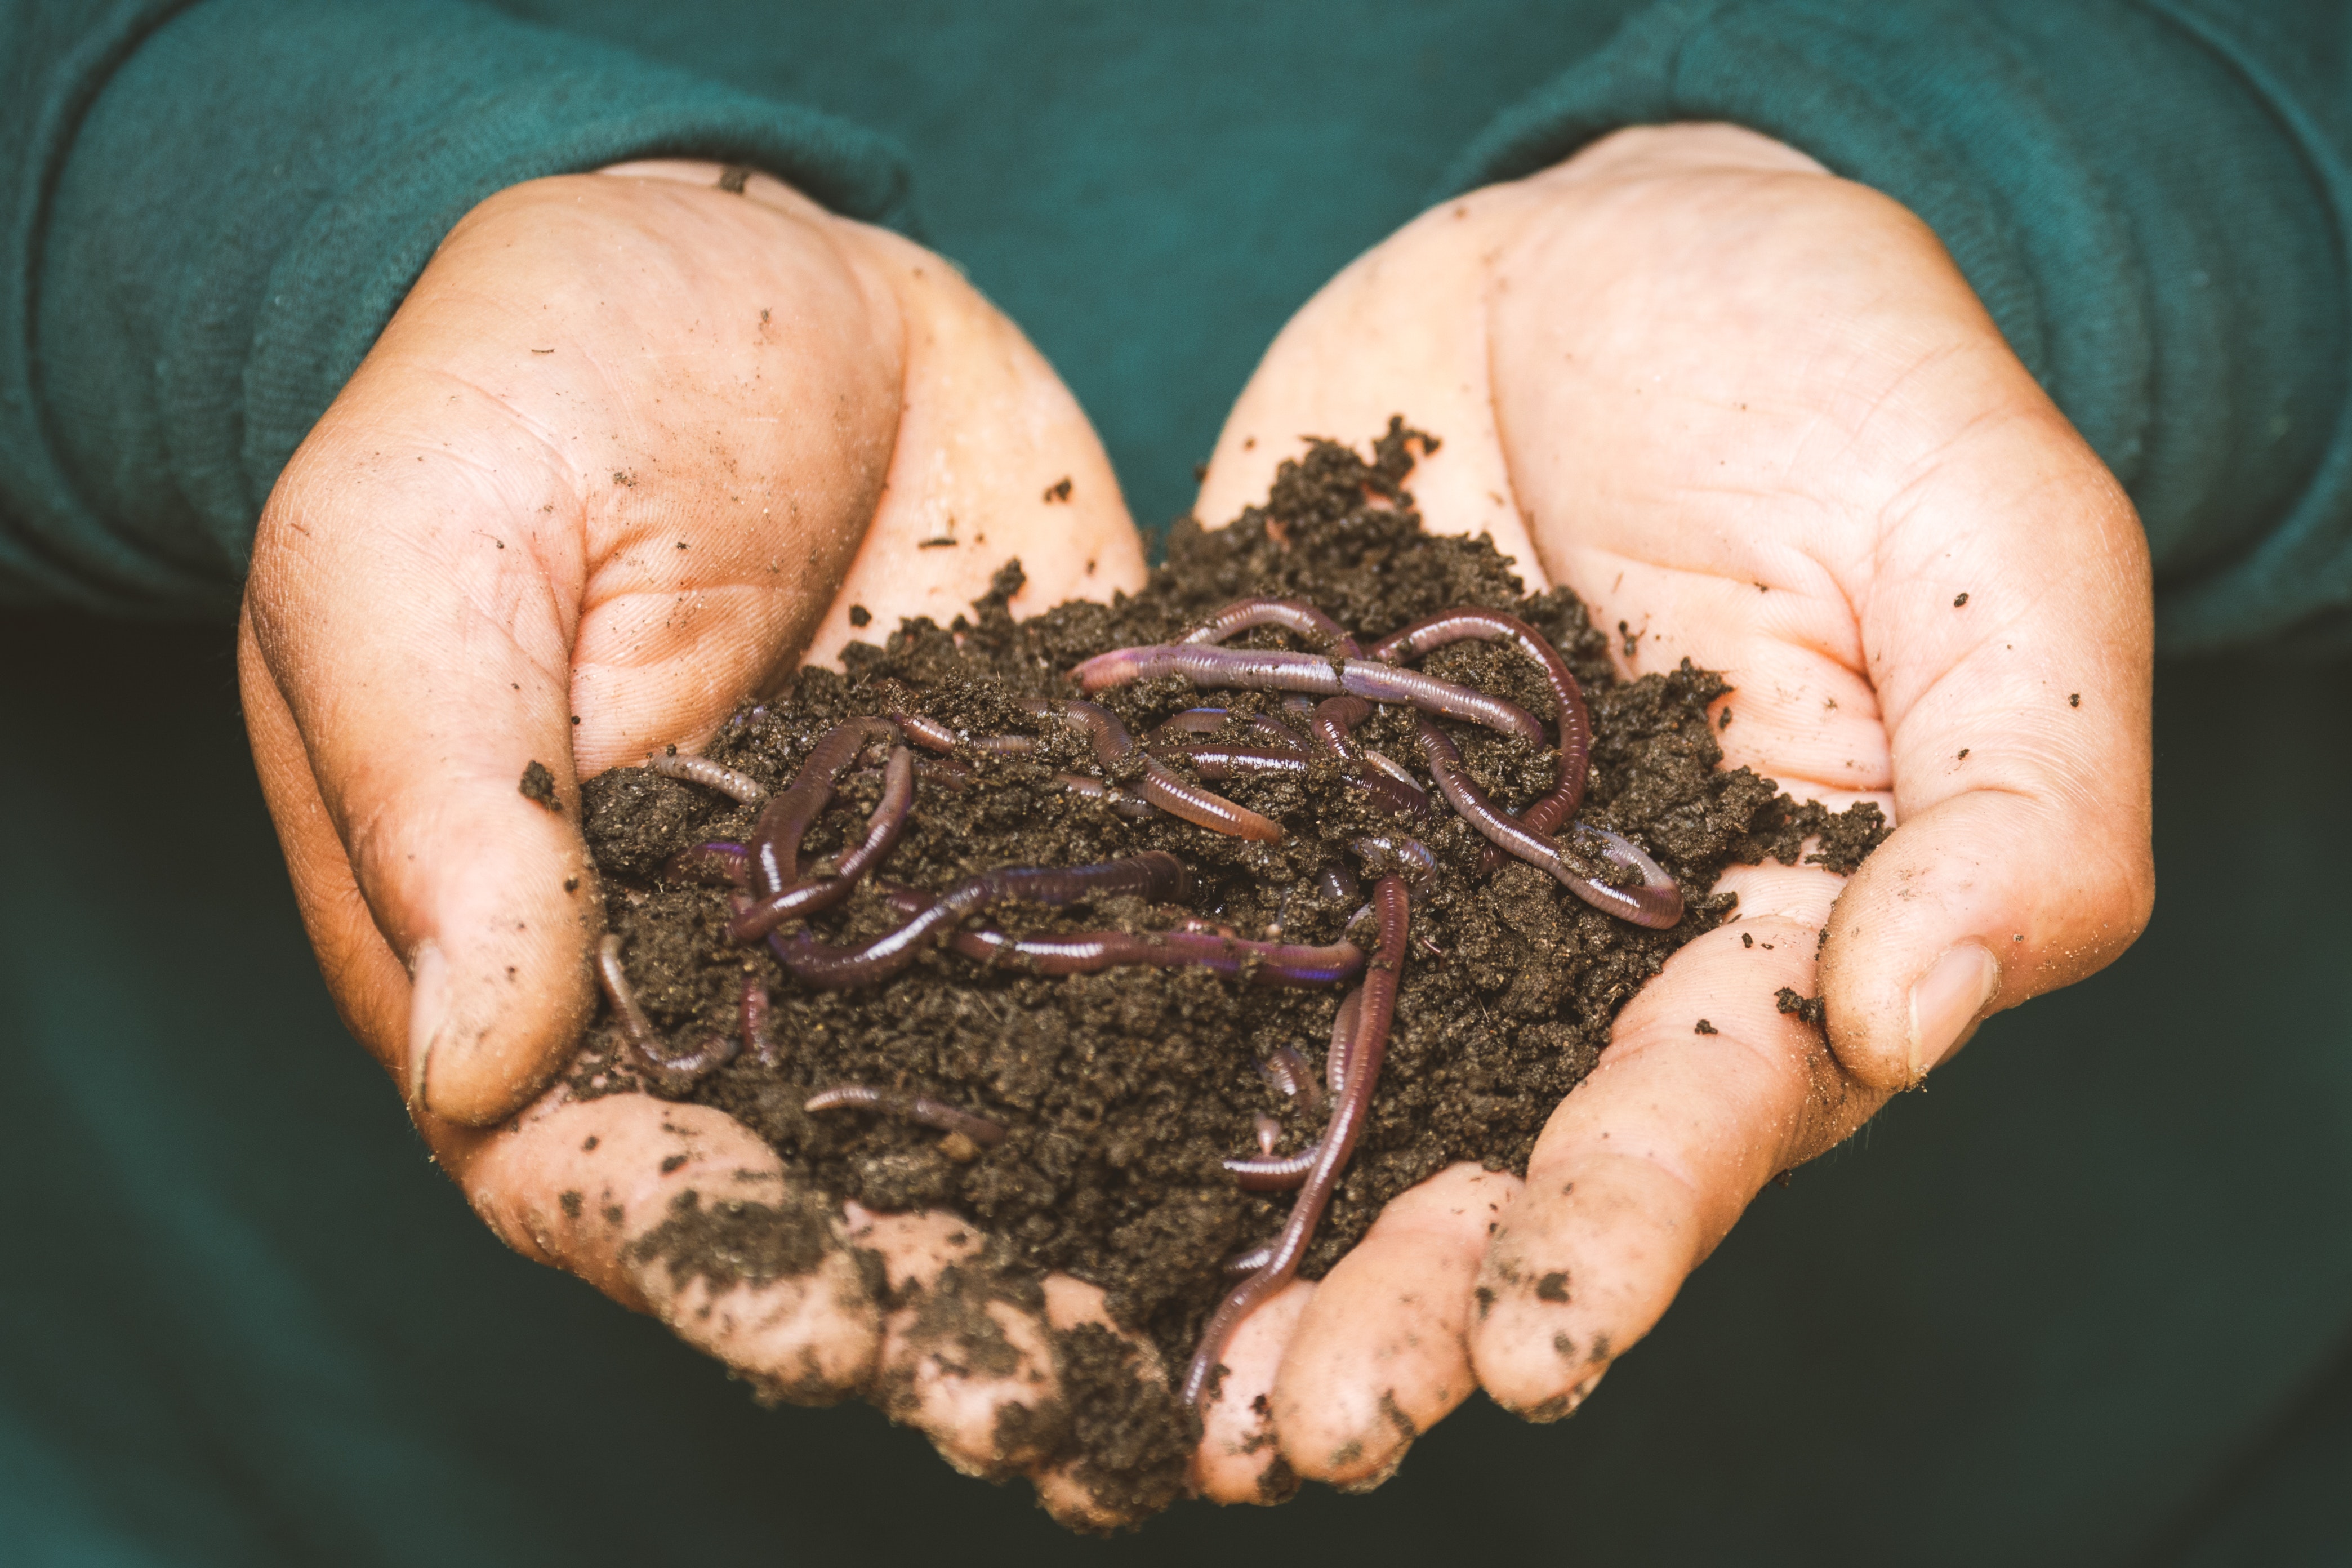  Compost Worms: Everything You Need to Know About Composting With Worms.